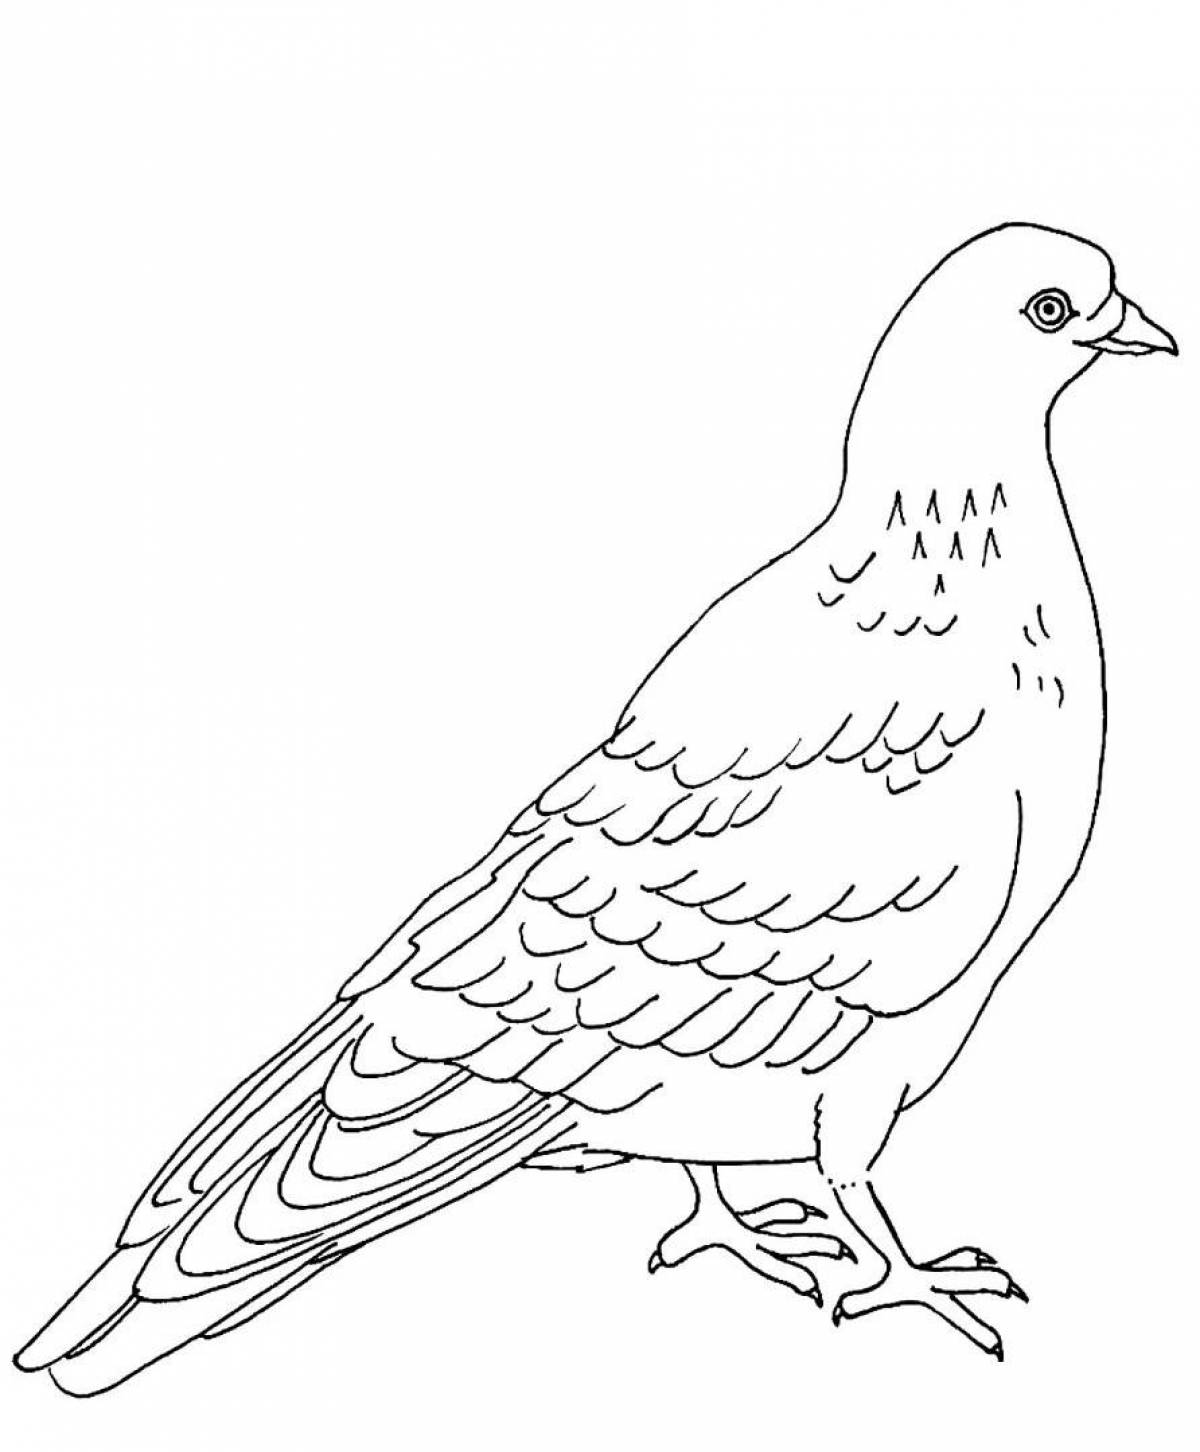 Playful dove coloring page for kids